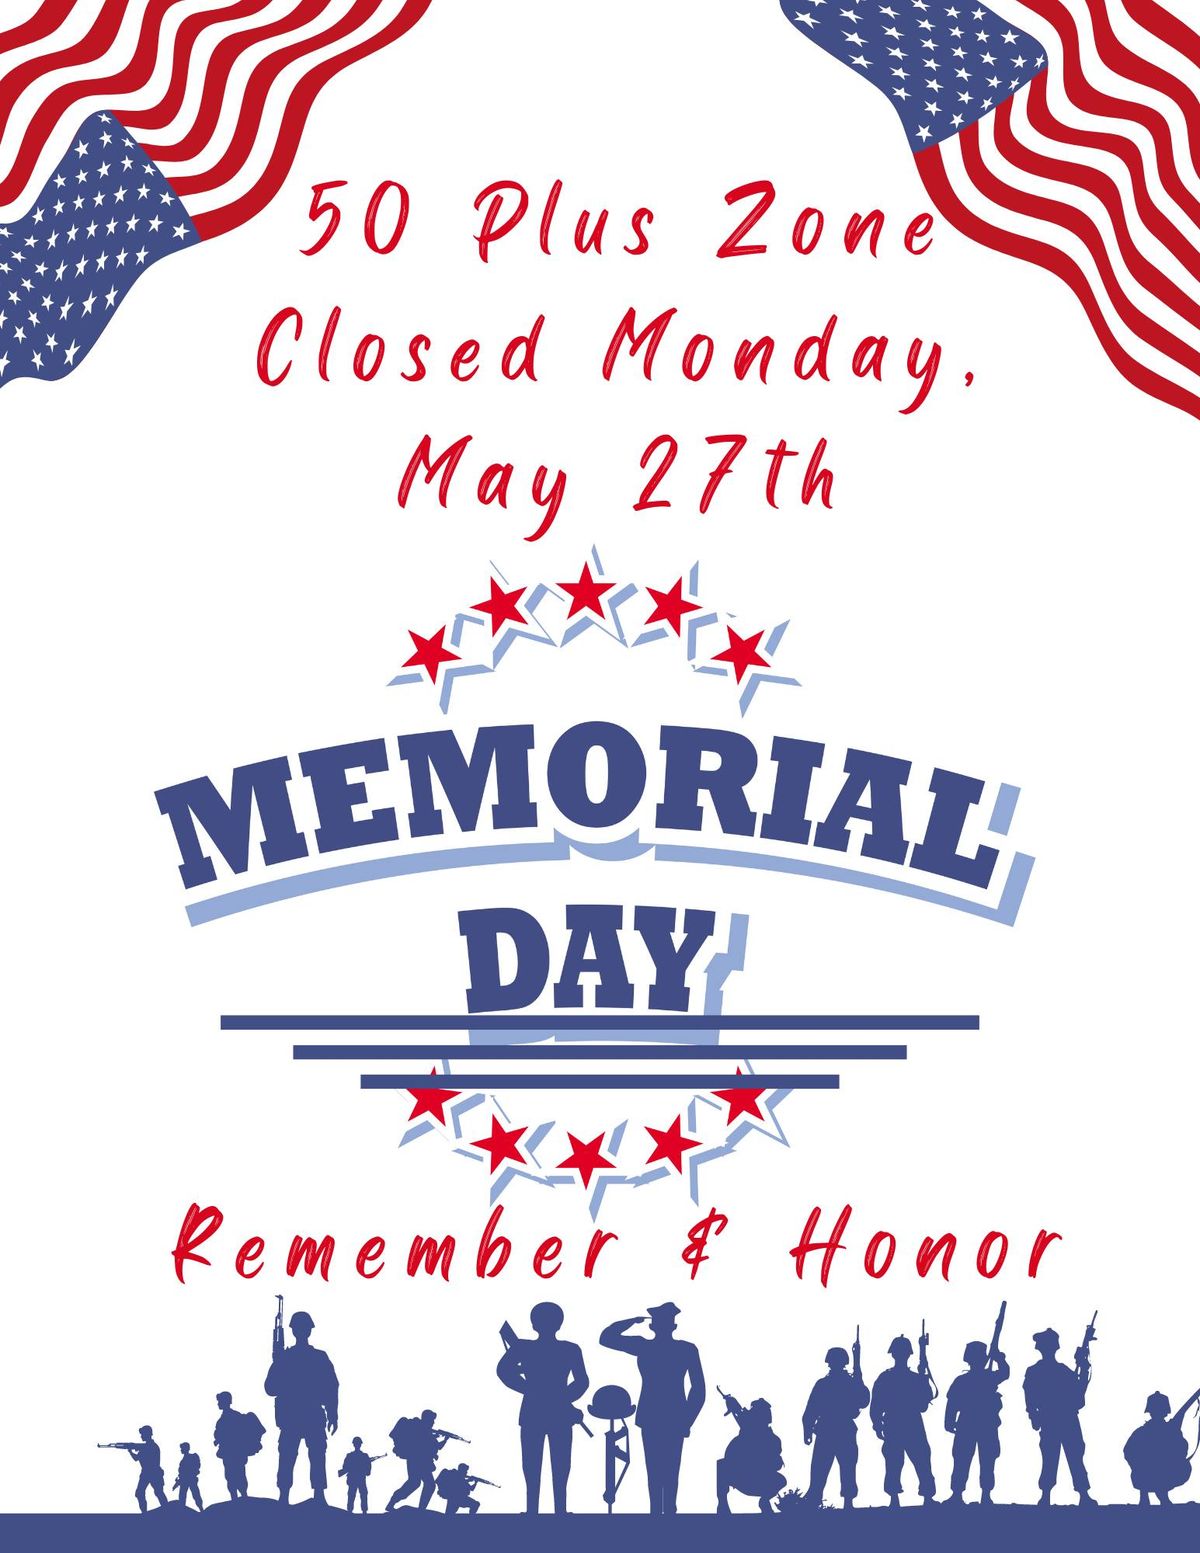 Zone Closed in Observance of Memorial Day